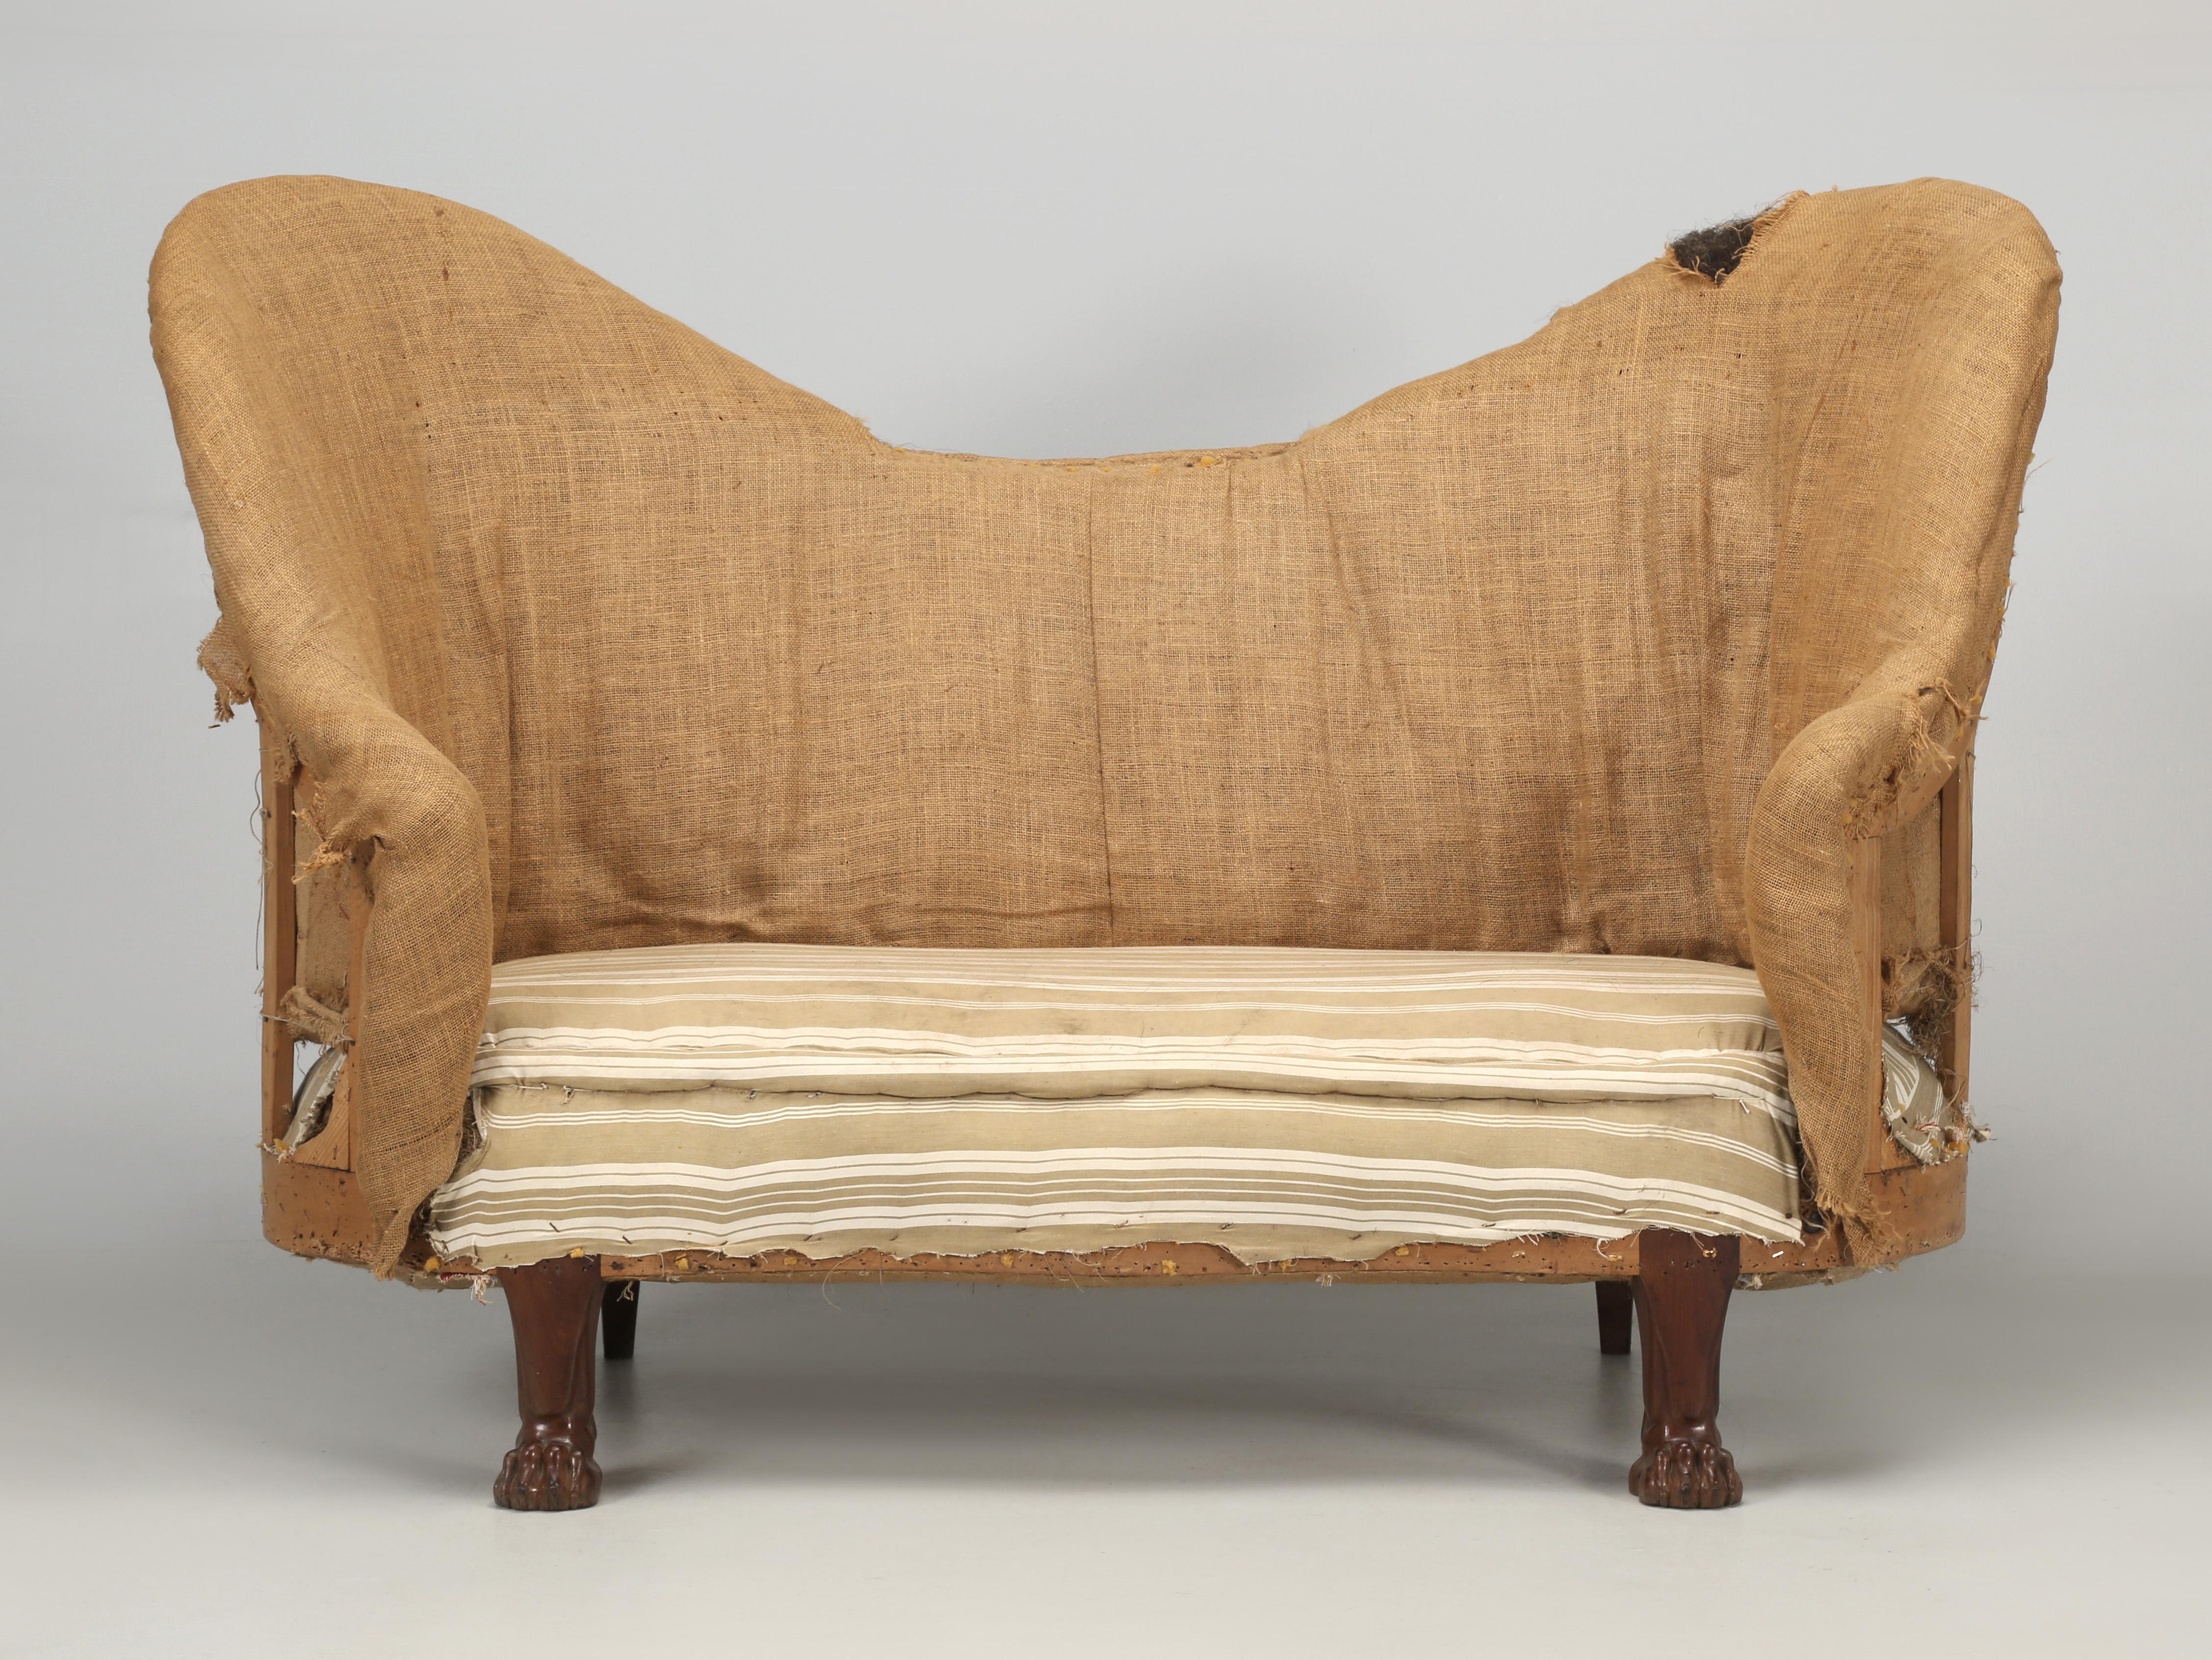 Antique French settee or loveseat deconstructed and probably made in the late 1800's. When you take a hard look at the lion paw feet, you'll notice two things, the wood is a very high grade mahogany and the carving quality is excellent. Great for